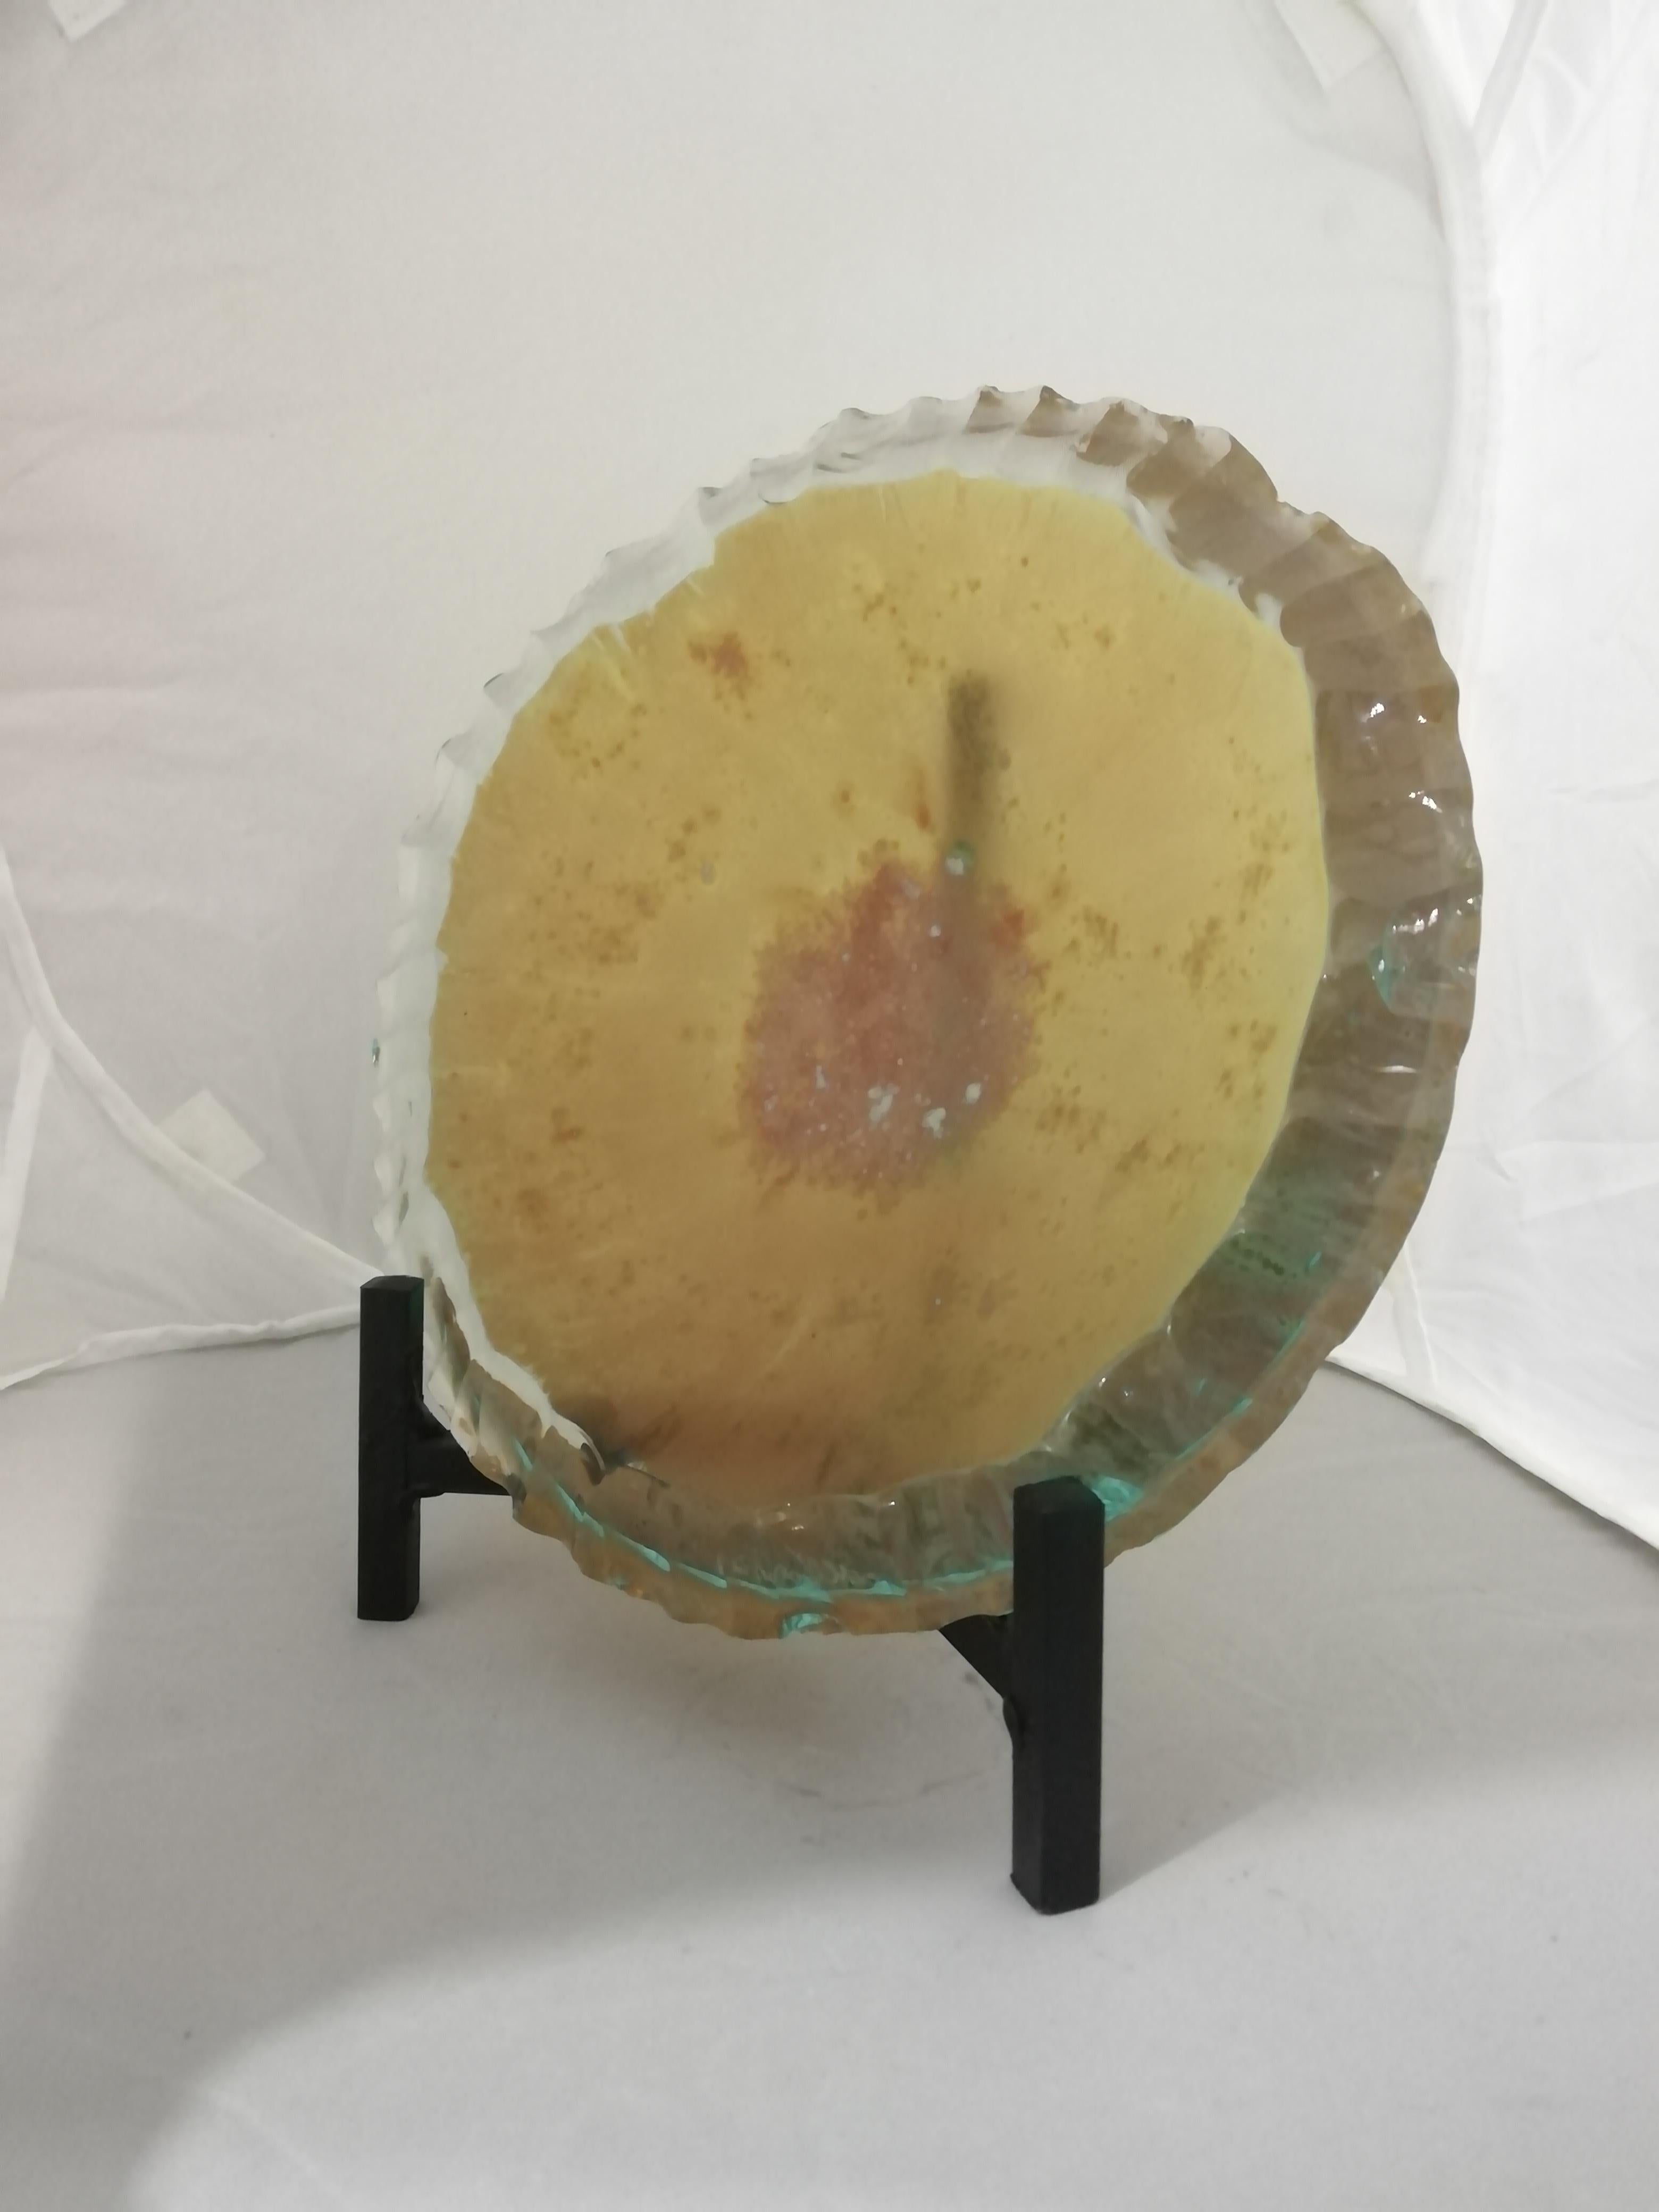 A pair of Mexican thick glass bowls by glassworker Jorge Ortiz Bencomo from Guadalajara, Jalisco.

The brutalist design features a chiseled irregular cut and yellow acid distressed center. Both plates are signed on the back. Plate holders are